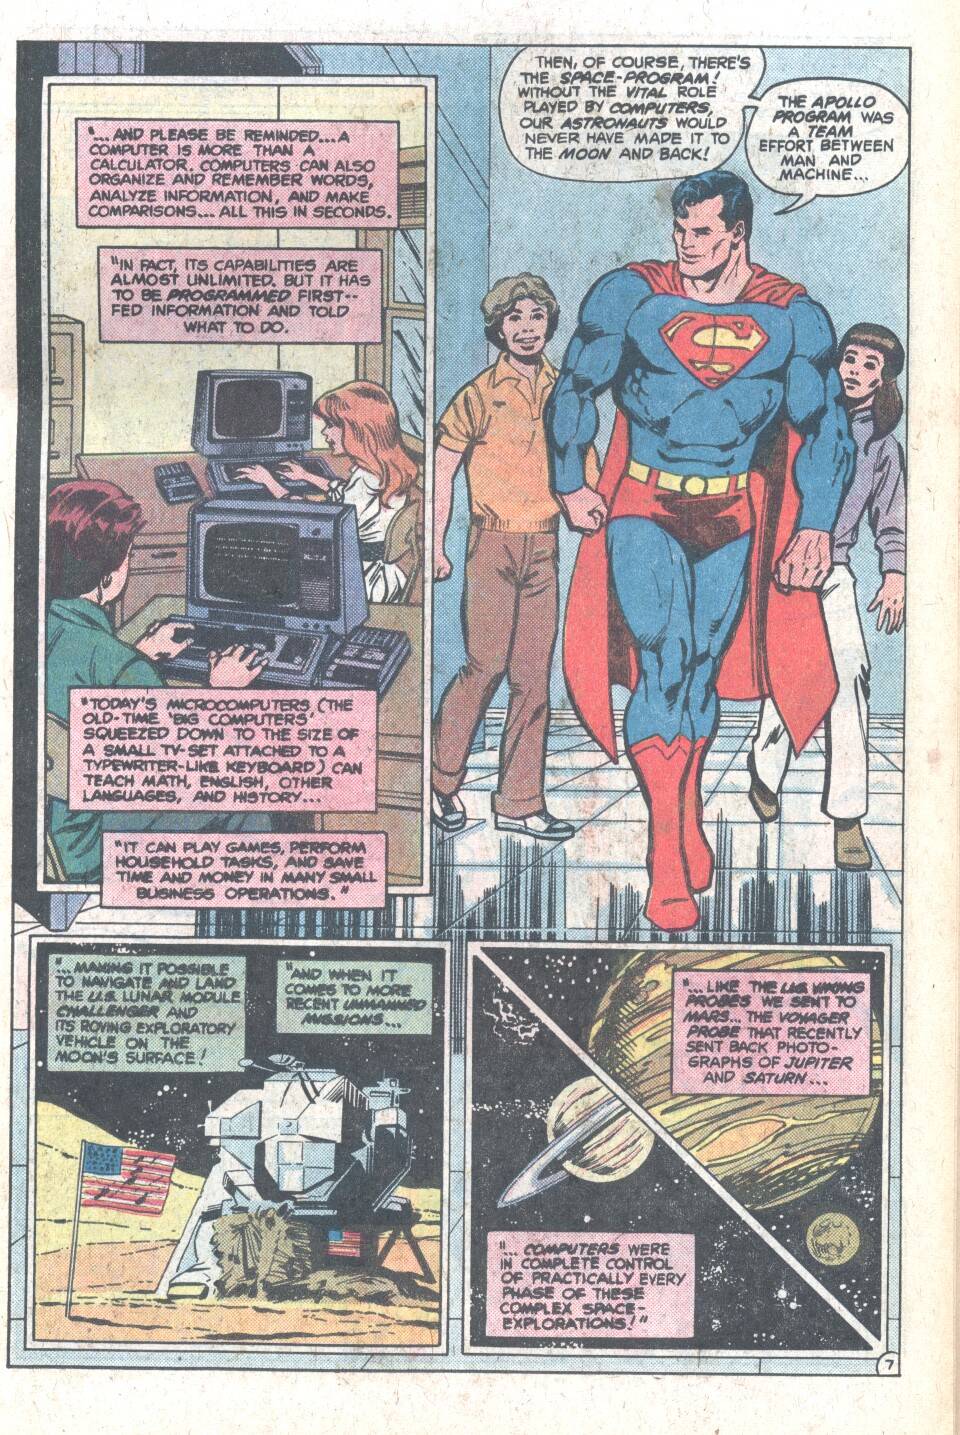 The New Adventures of Superboy 7 Page 18